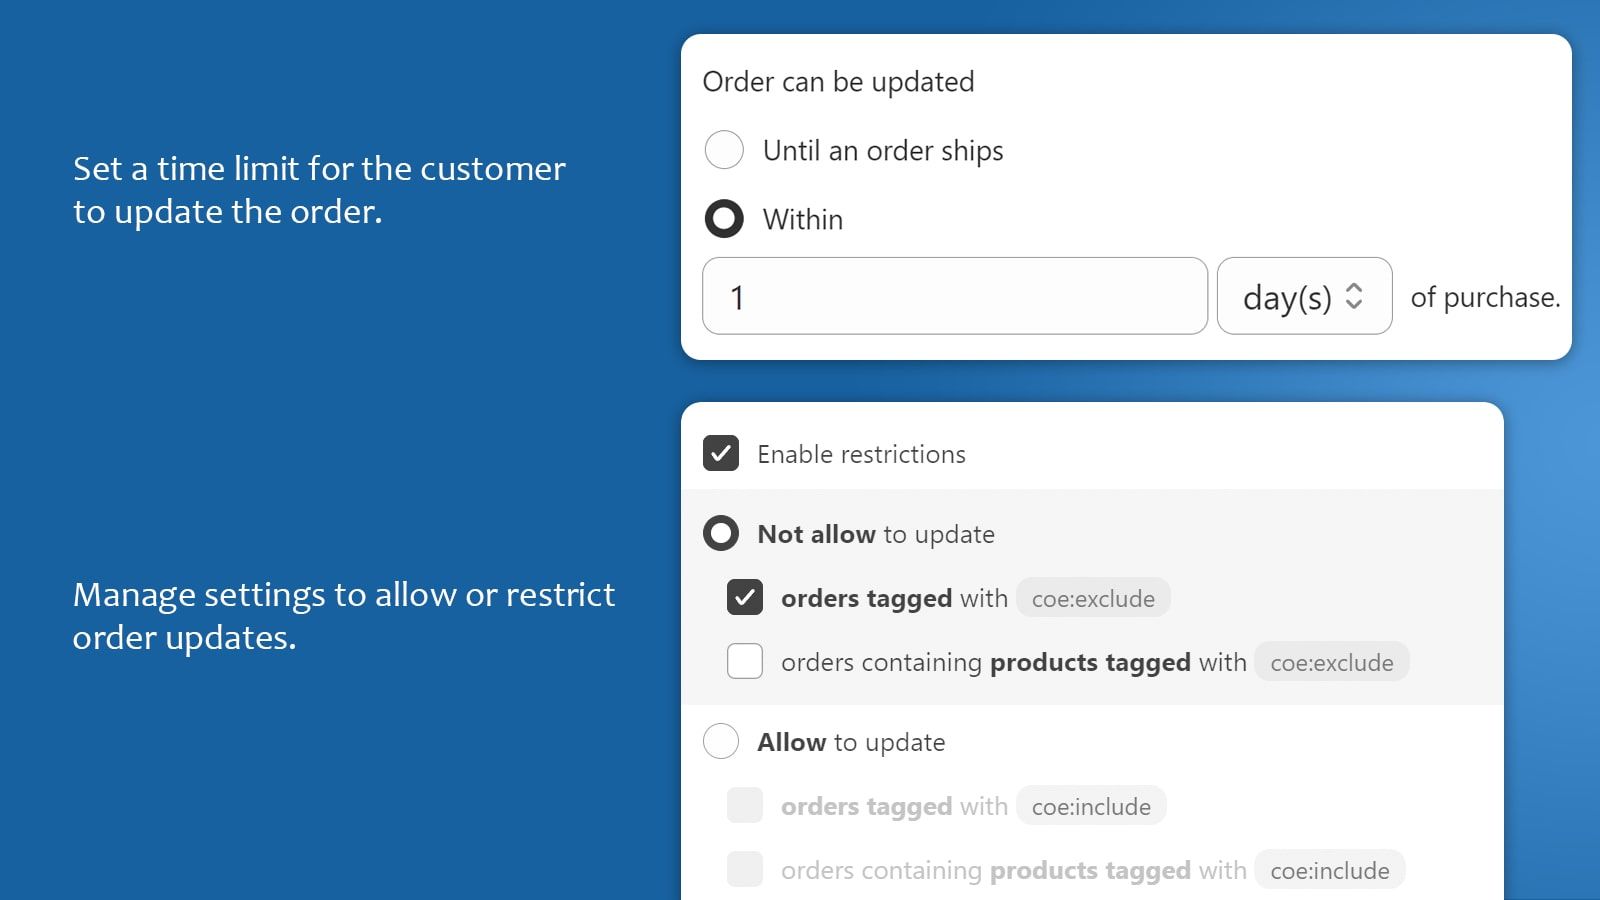 Set time limits and restrict order updates